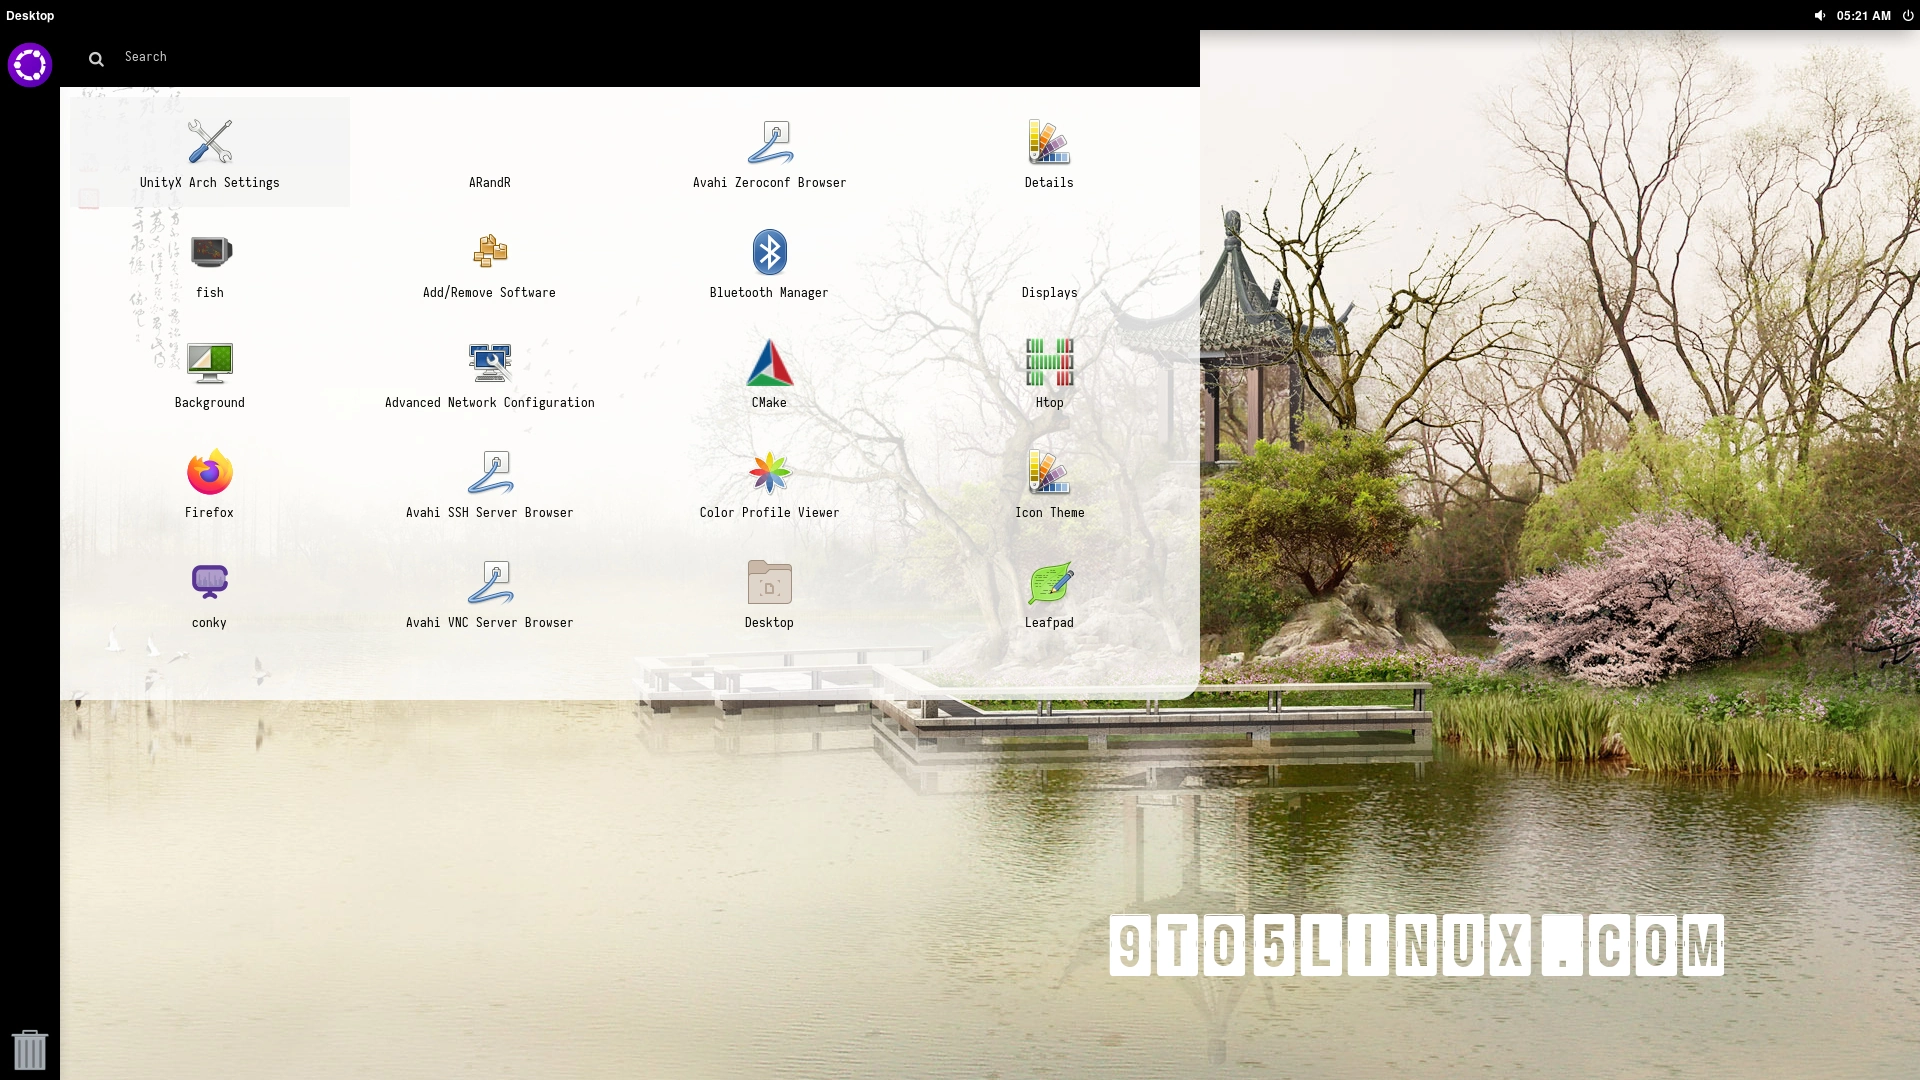 UnityX 10 Desktop Environment Makes Great Progress, Now Features New Panel and Sidebar Designs